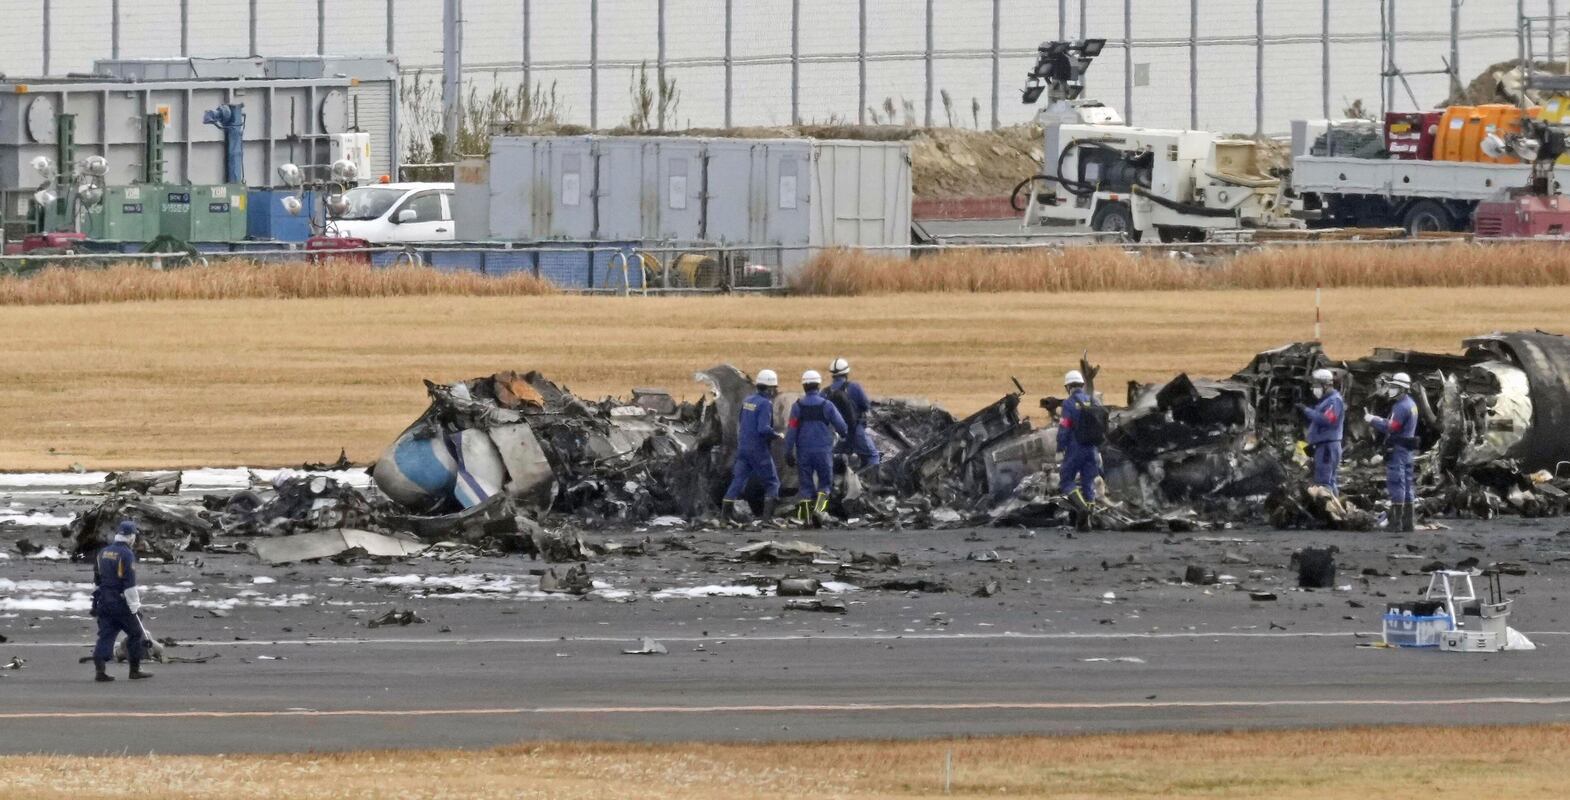 Firefighters gather around the burn-out Japanese coast guard aircraft at Haneda airport on Wednesday, Jan.  3, 2024, in Tokyo, Japan.  Transport officials and police each began their on site investigation at Tokyo’s Haneda Airport on Wednesday after a large passenger plane and the Japanese coast guard aircraft collided on the runway and burst into flames, killing several people aboard the coast guard plane.  (Kyodo News via AP)